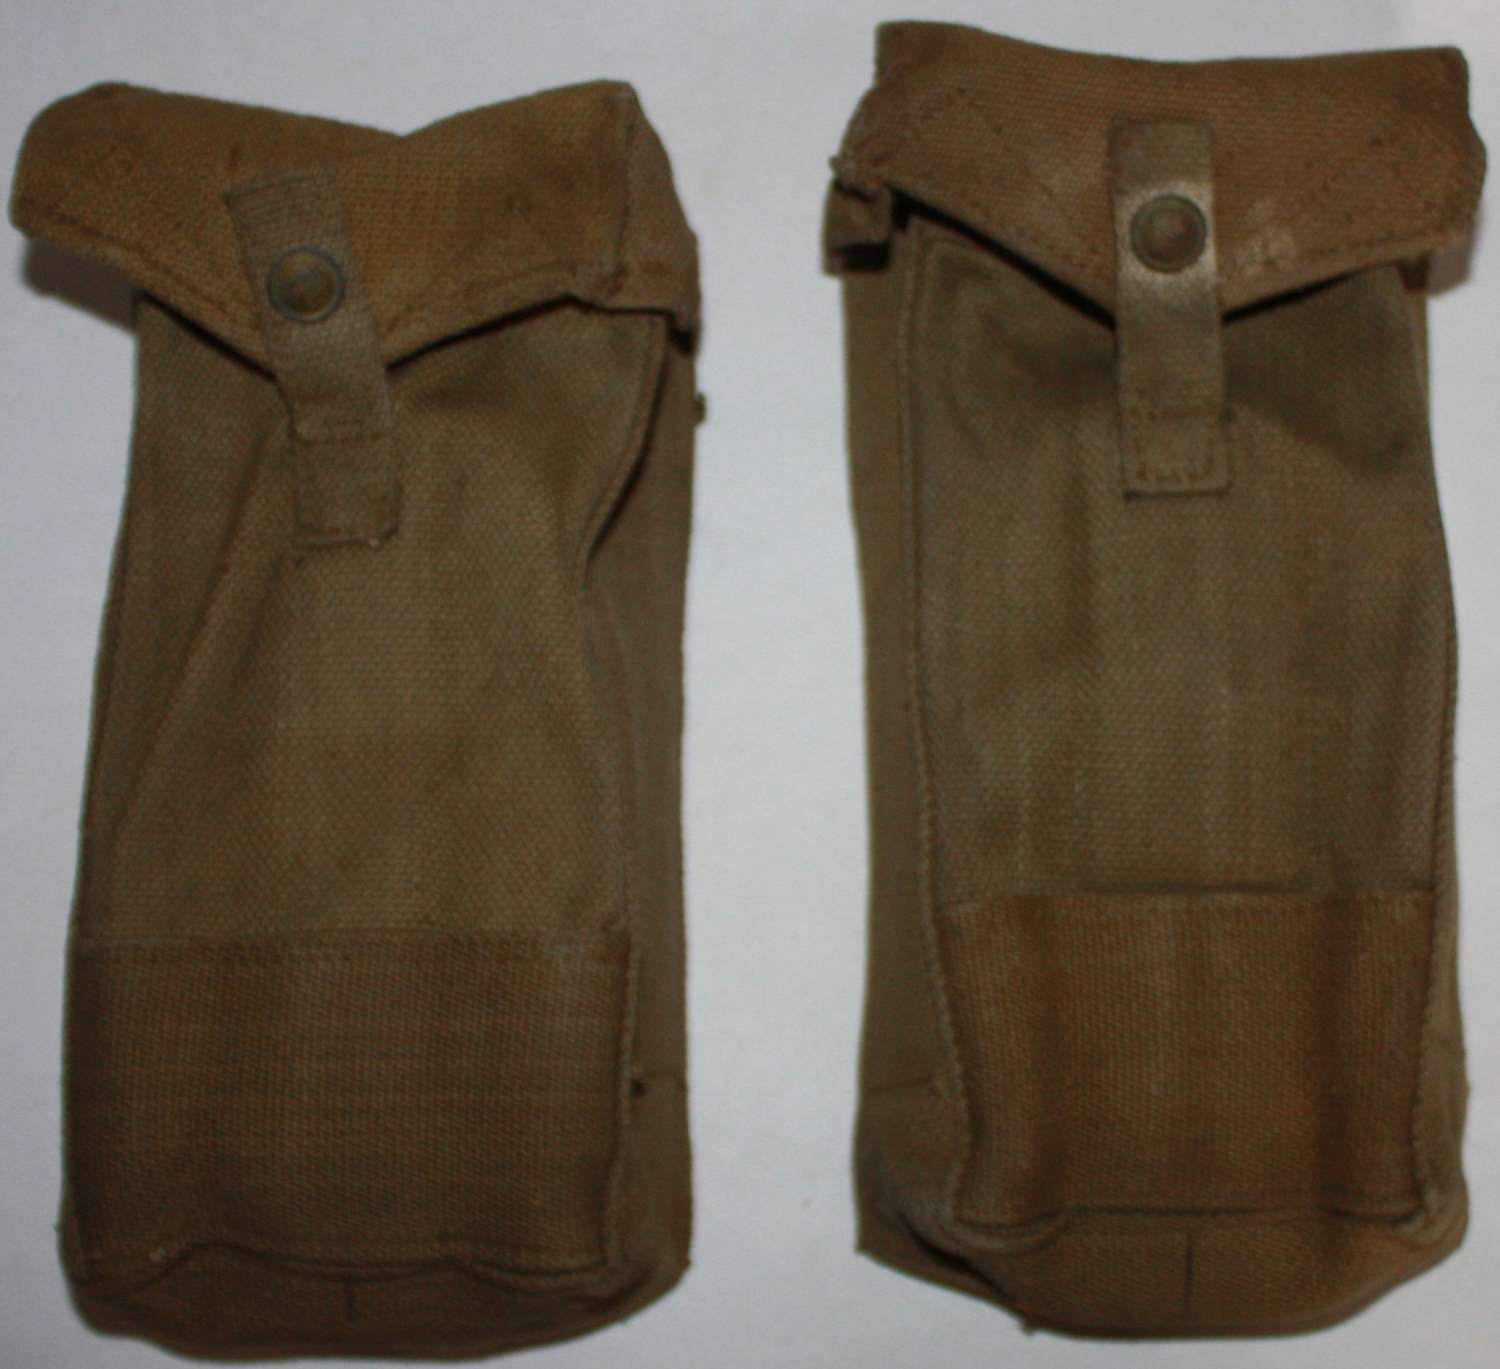 A GOOD USED MATCHING PAIR OF MKIII 37 PATTERN WEBBING AMMO POUCHES